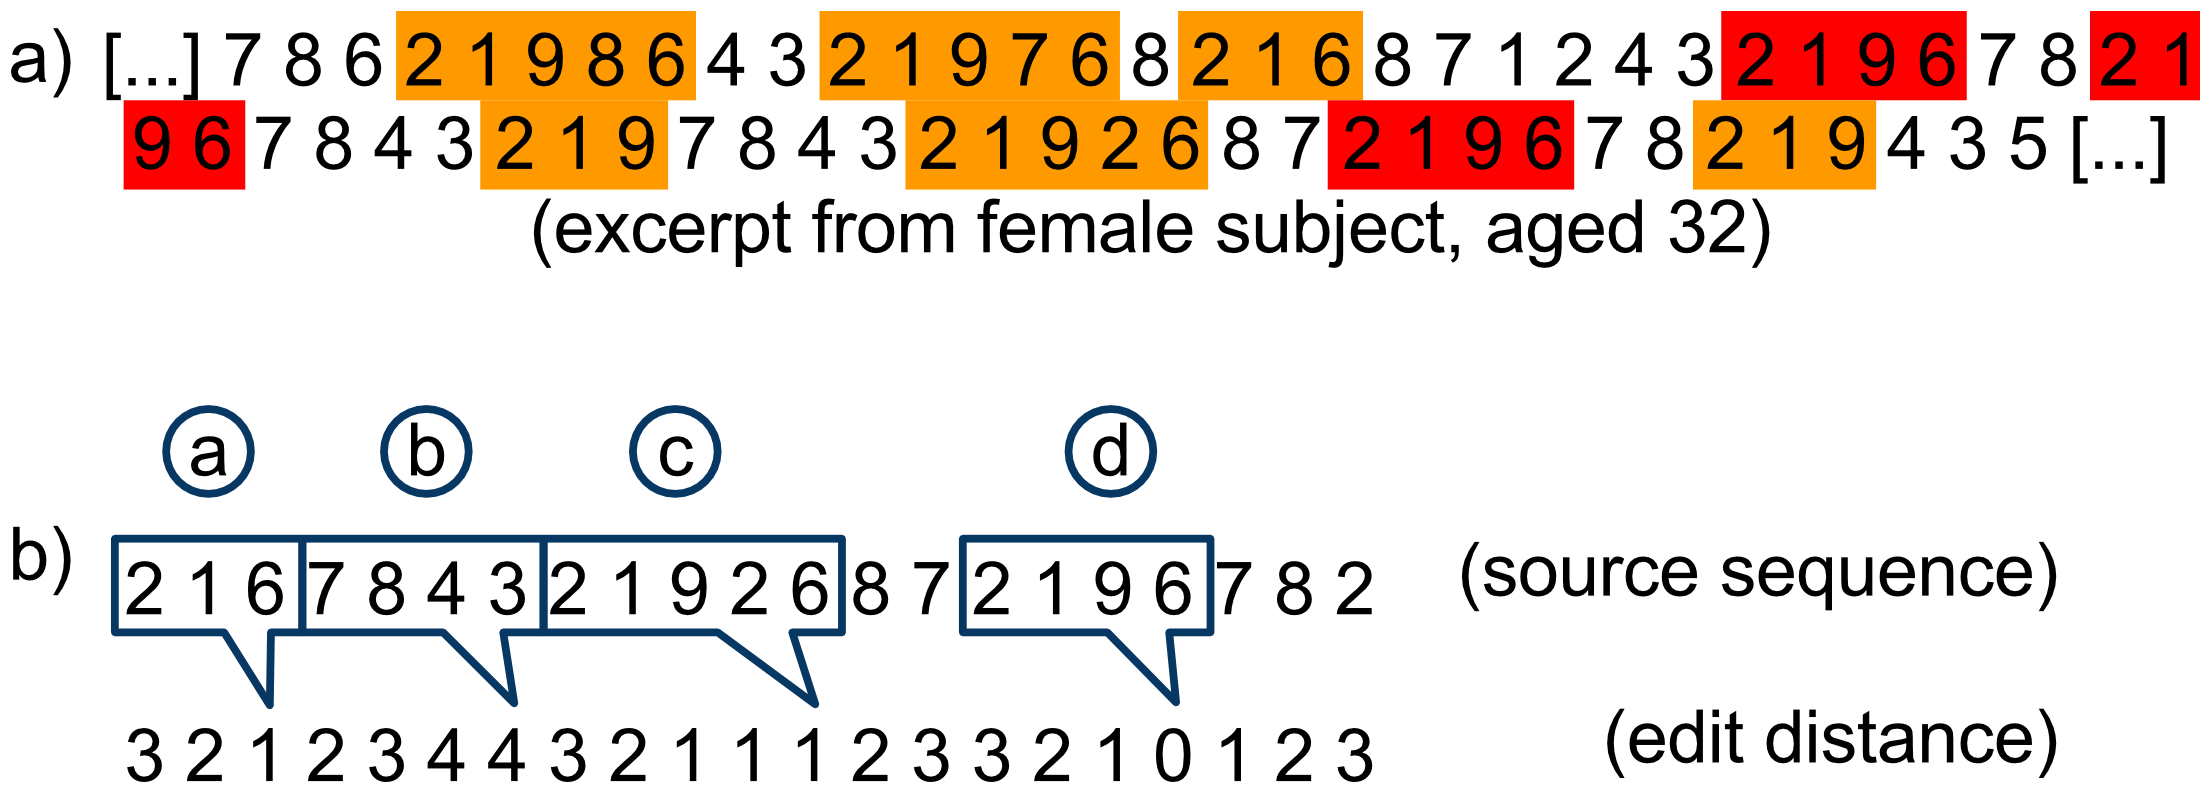 Image from the research paper showing how the pattern 2, 1, 9, 6 is predominant for a subject aged 32.